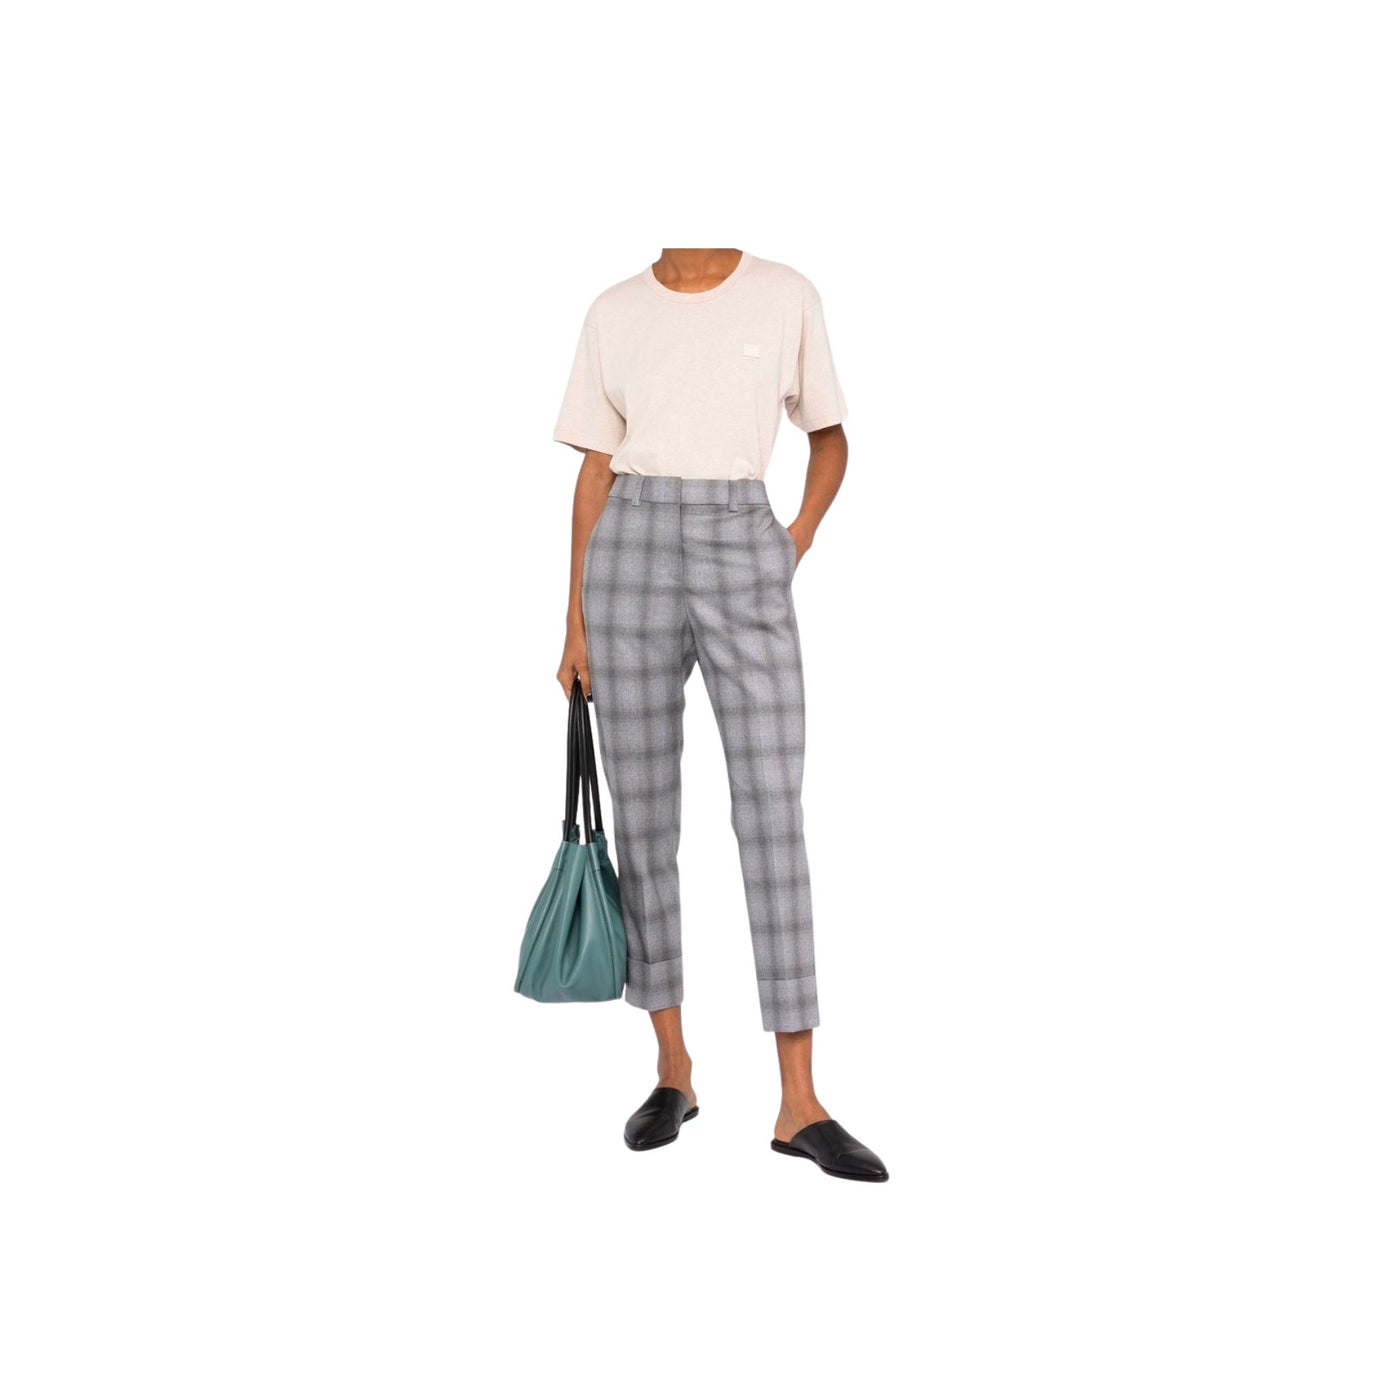 Women's trousers in lurex with checked pattern